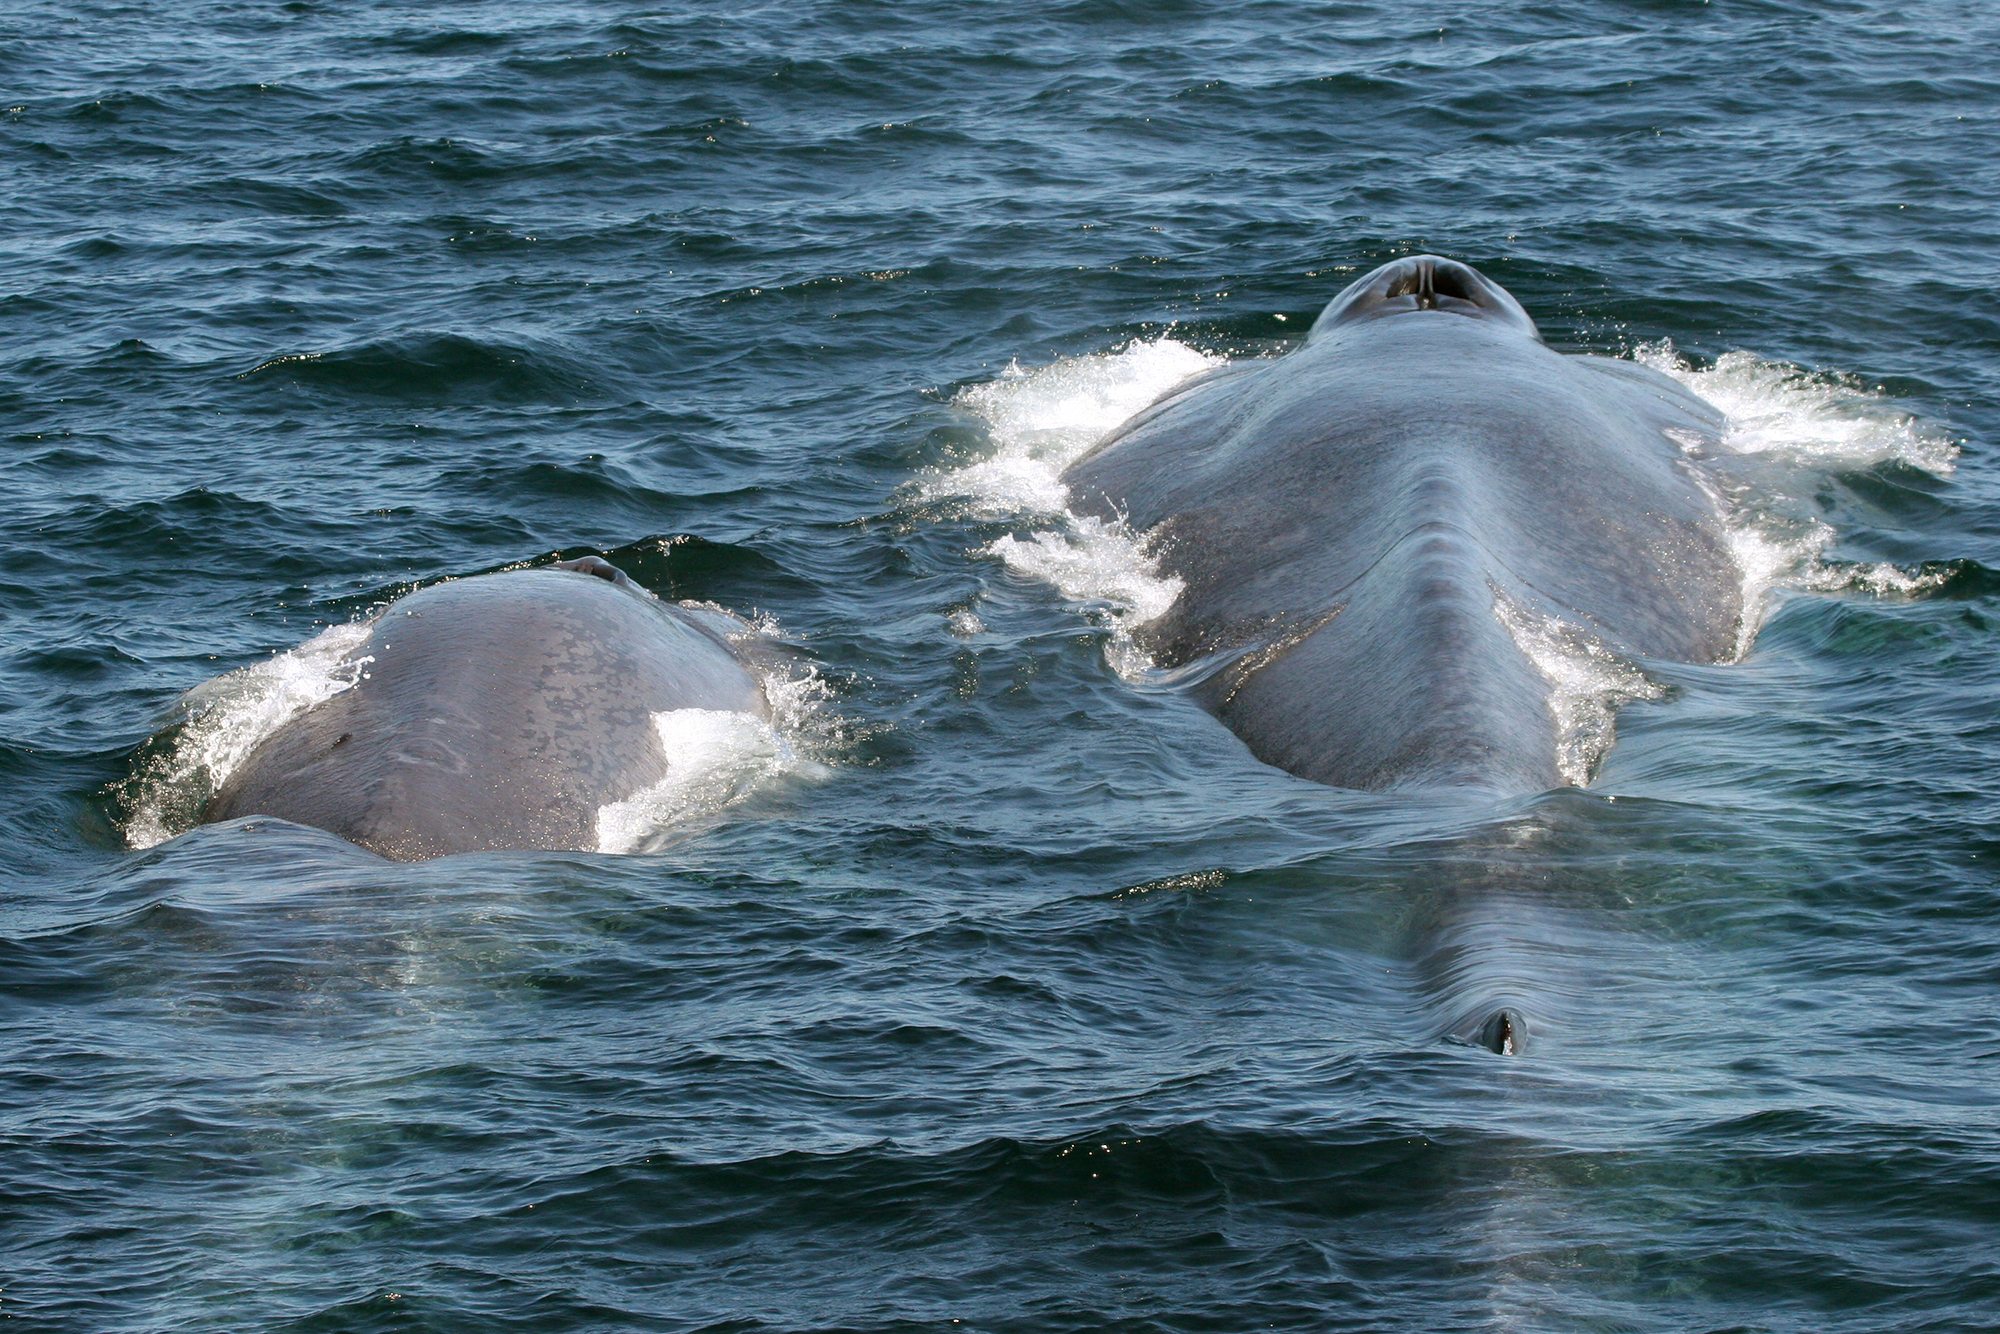 A blue whale mother with her calf swimming at the surface of the water